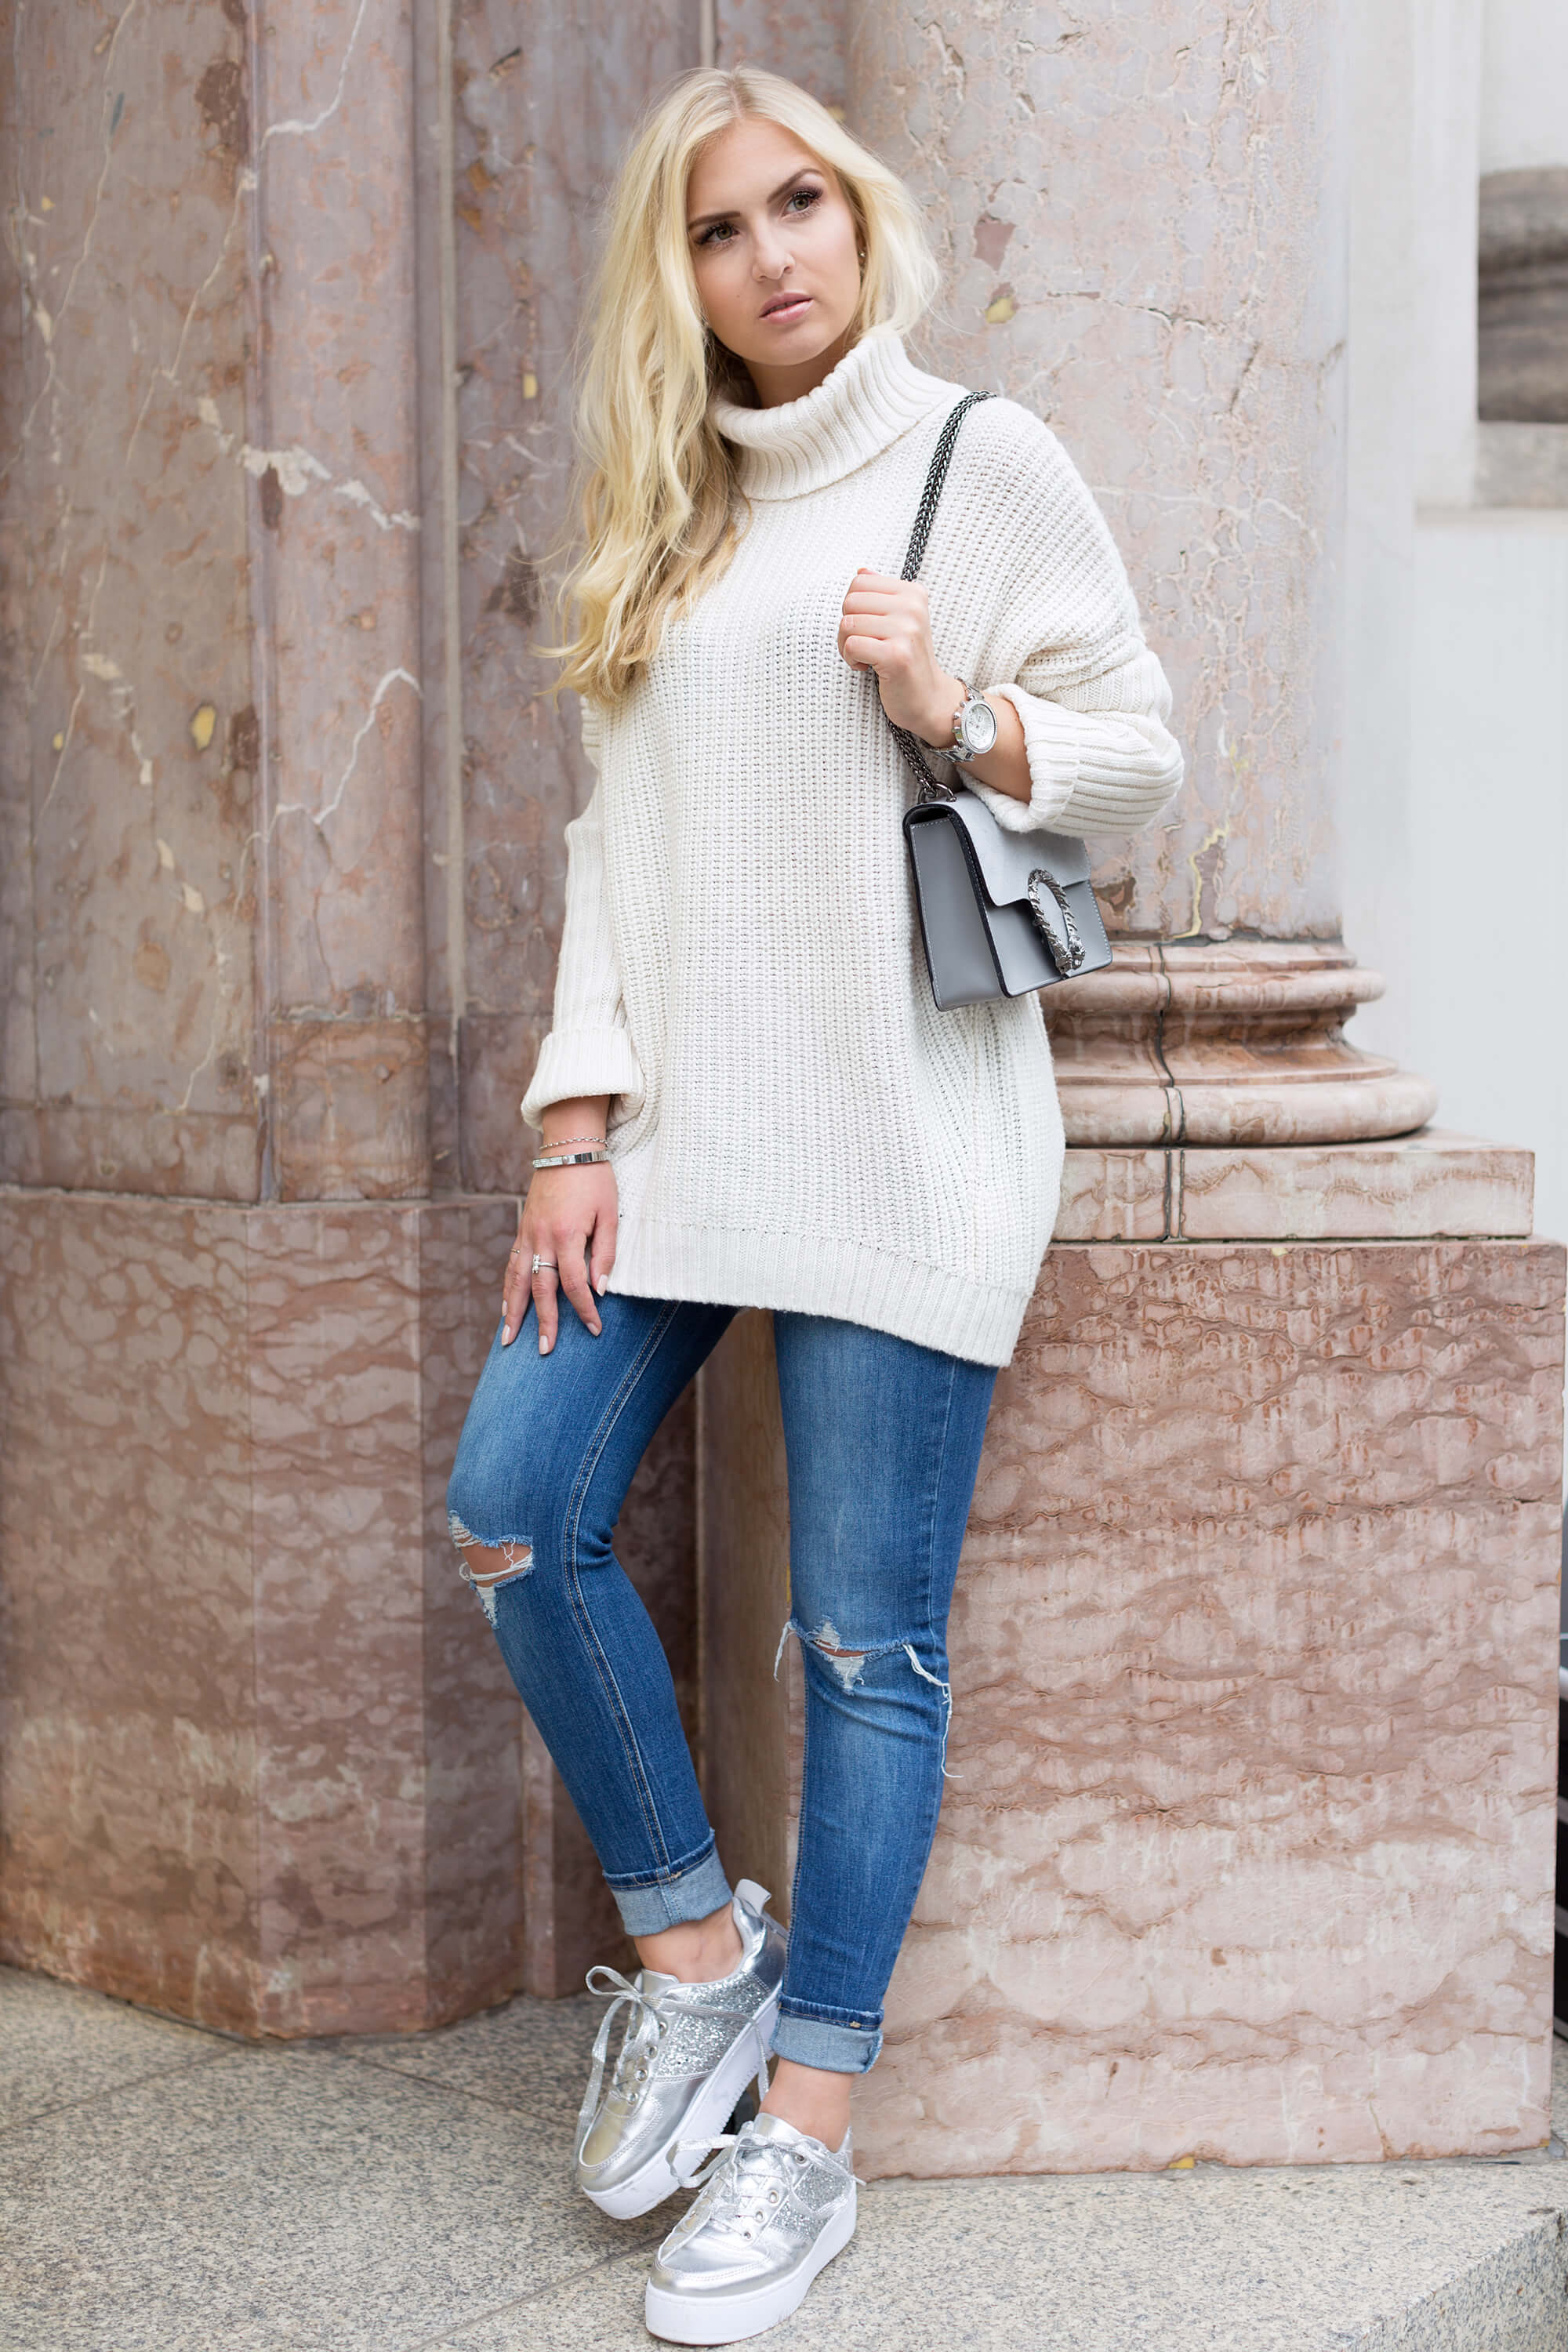 Strick Pullover Oversize Outfit Fashion Mode Blog Katefully